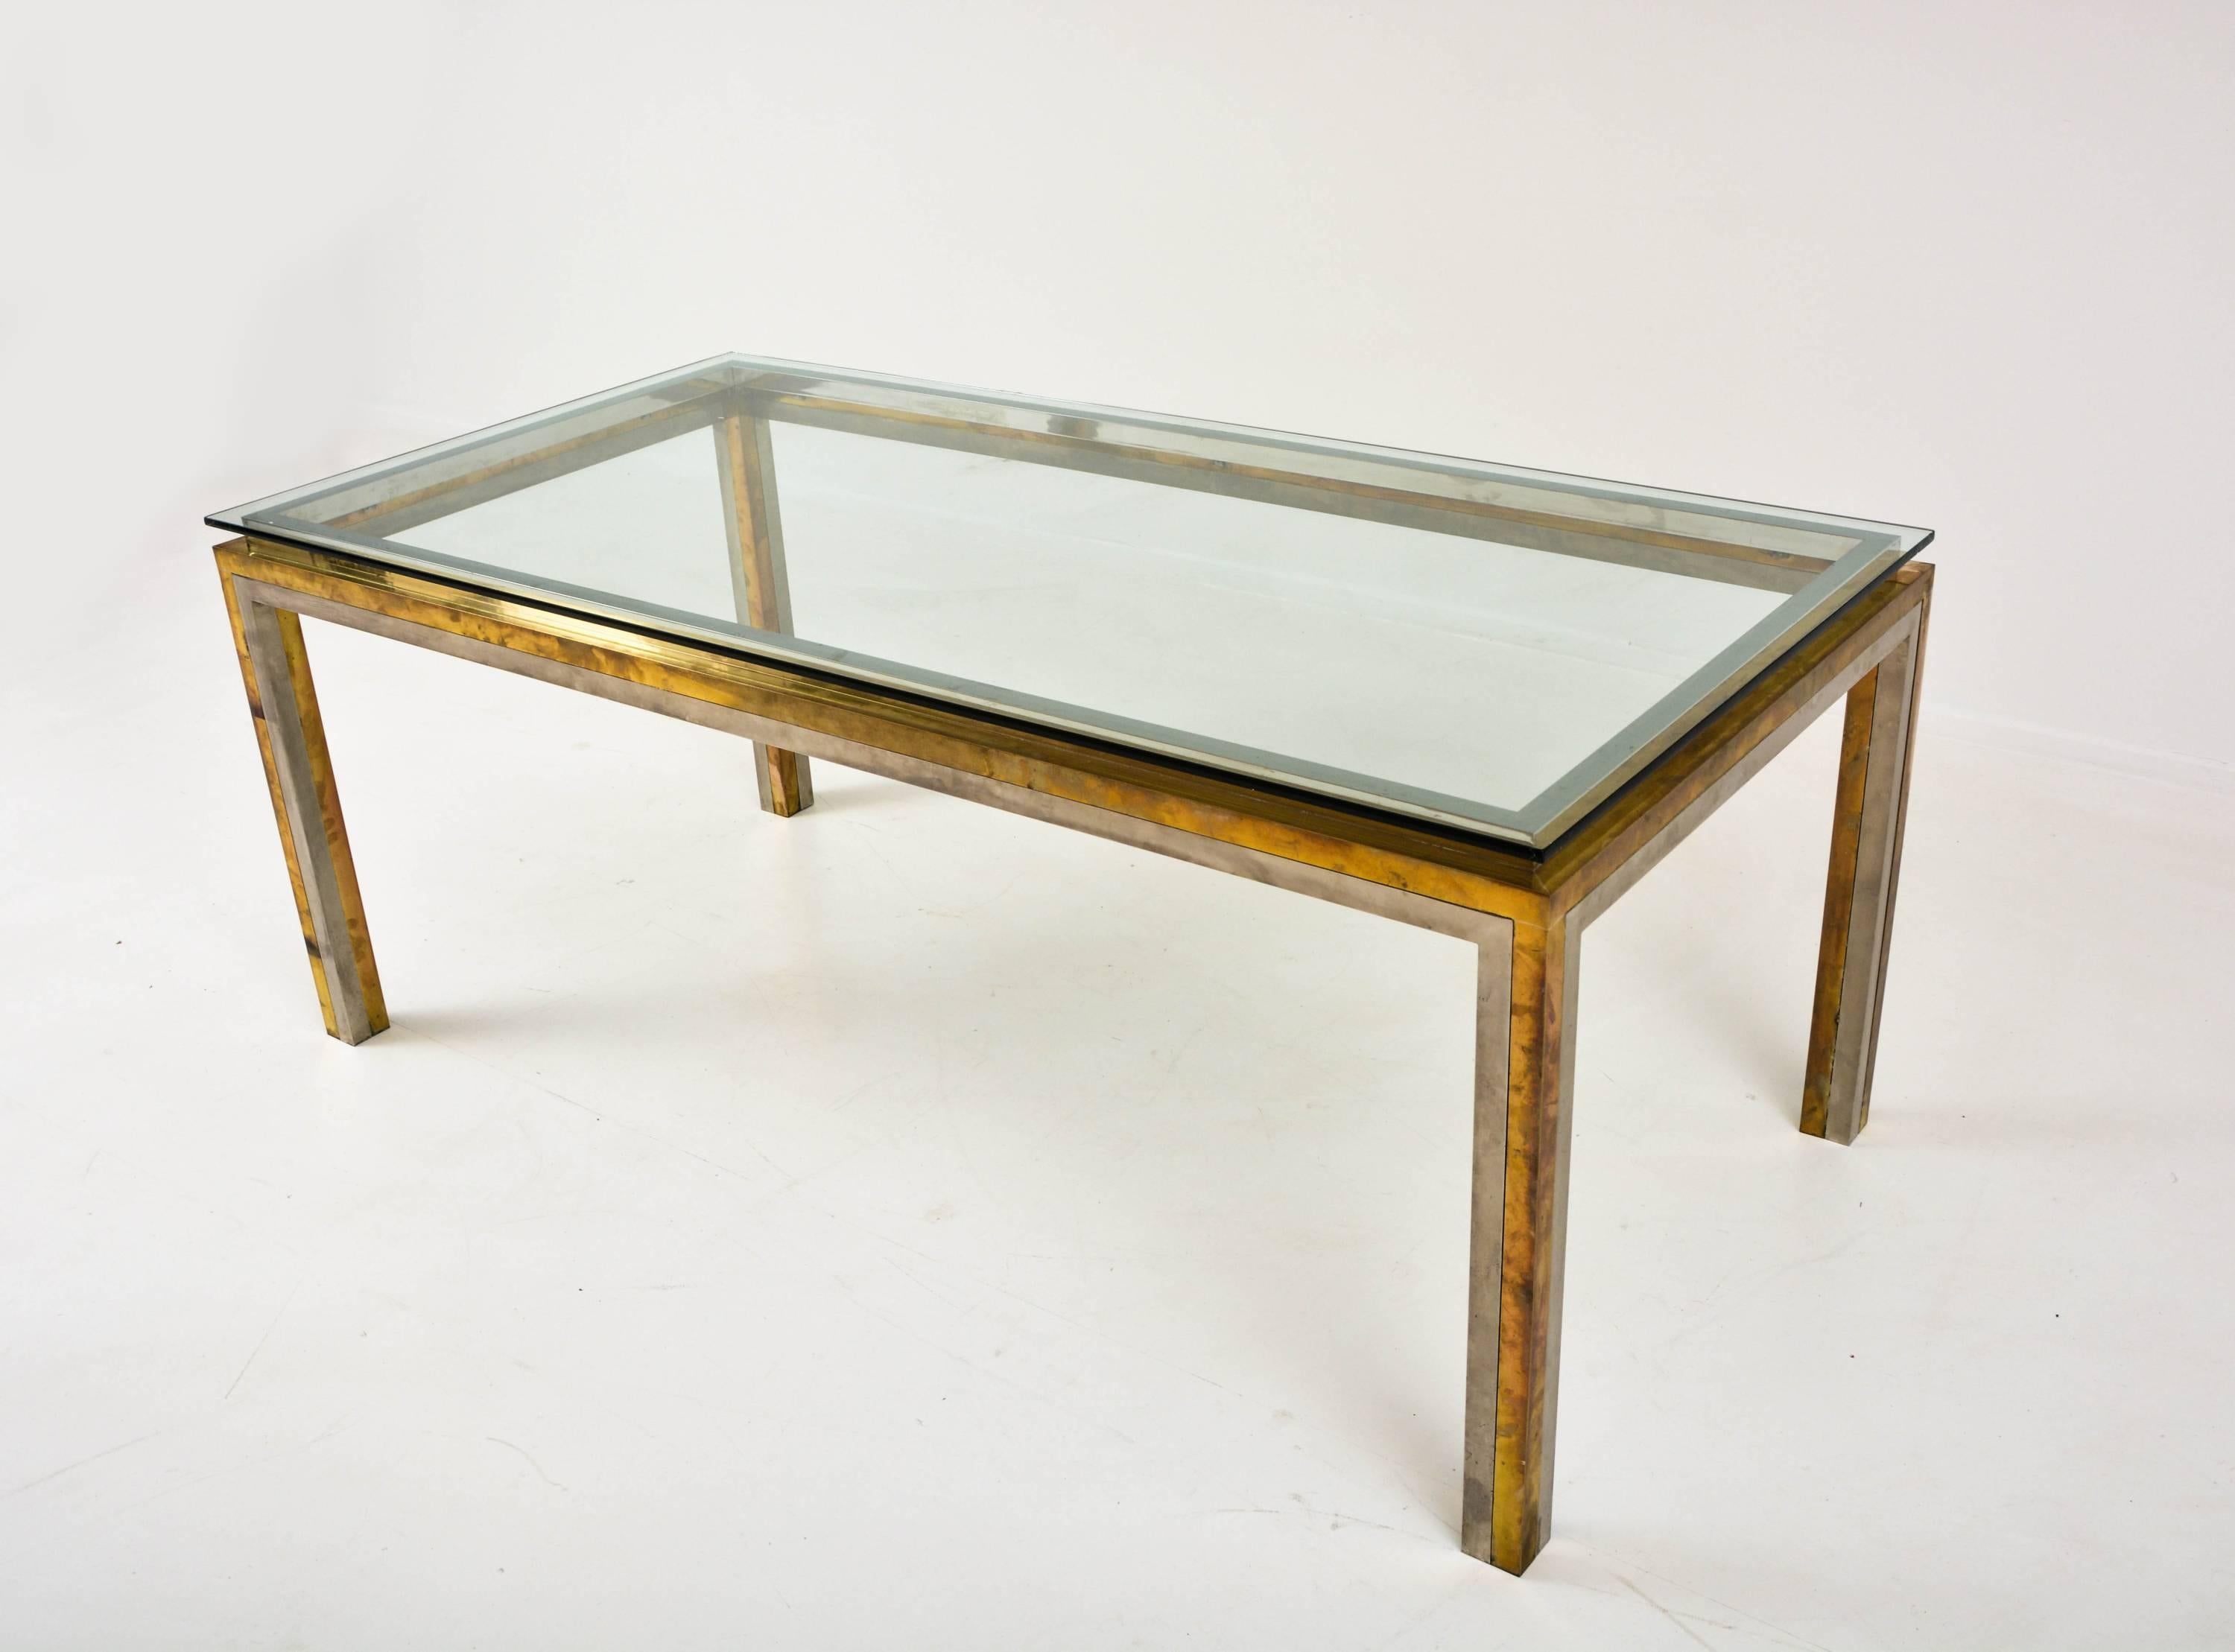 Maison Jansen glass brass and chrome dining table, France, 1970s.

Beautiful dining table by Maison Jansen, France, 1970s with excellent patina.
Simply a wonderful dining room piece.
 